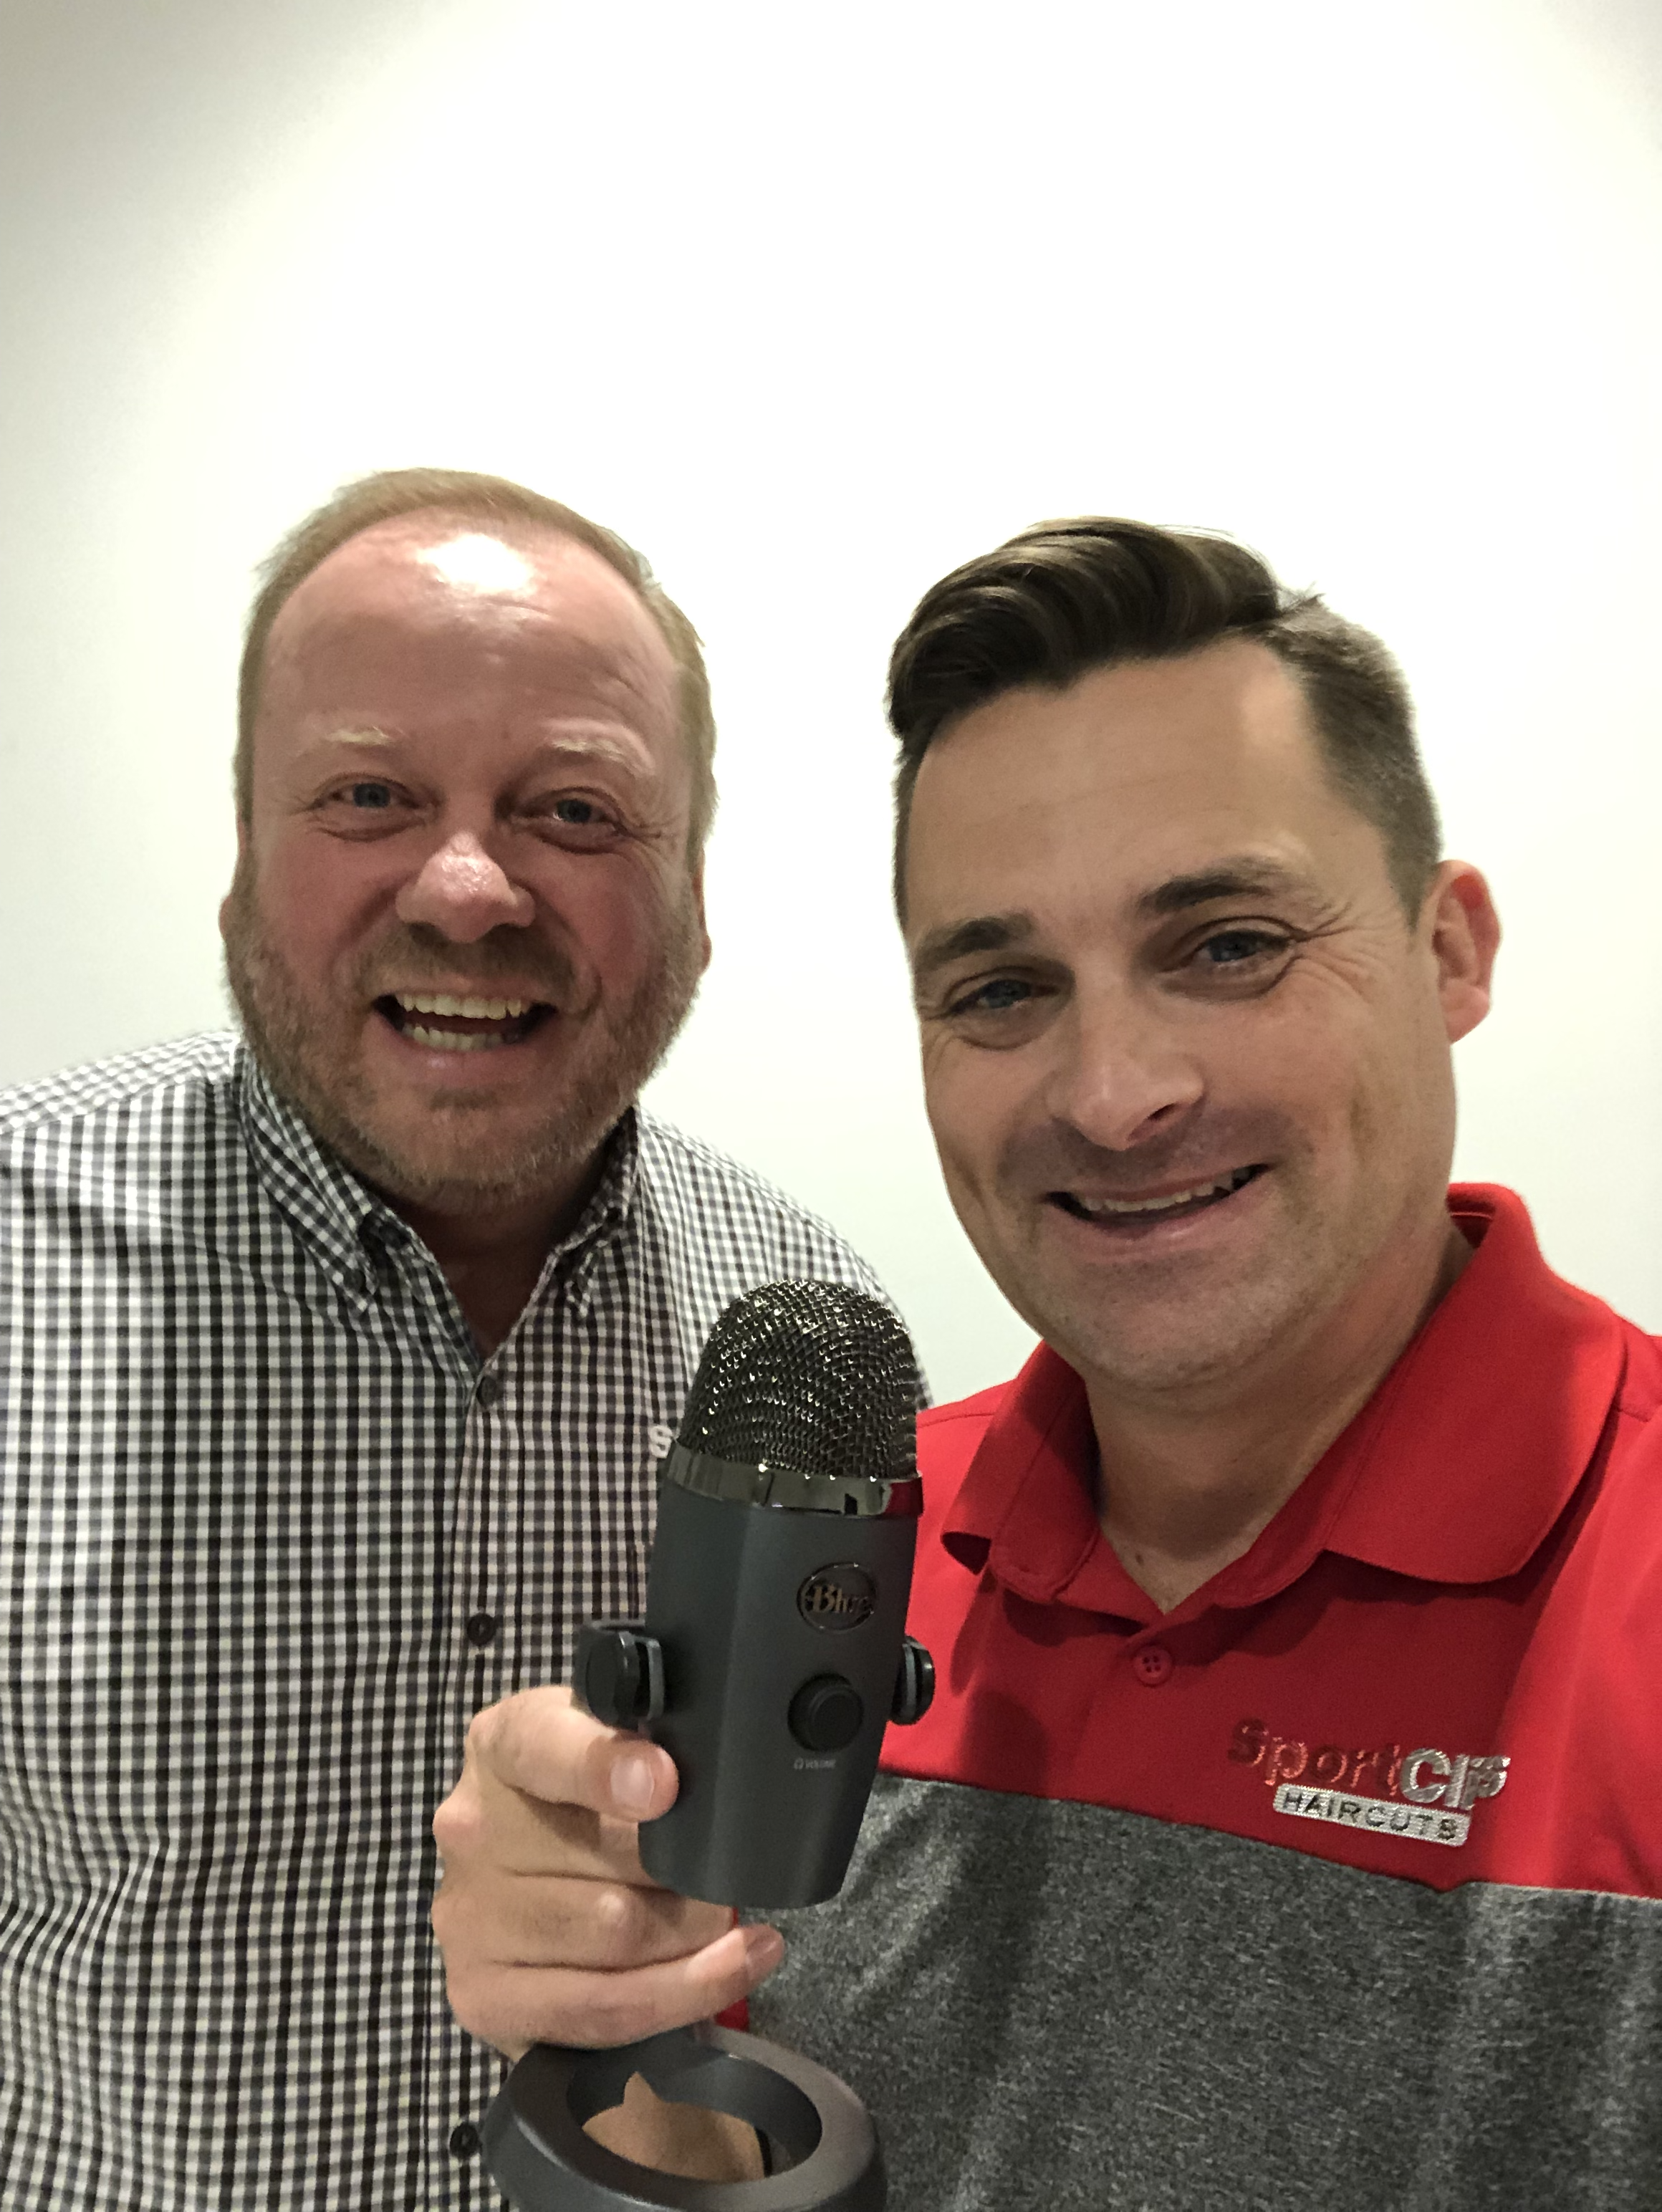 Duke Sorensen and Chad Jordan holding a microphone for their podcast